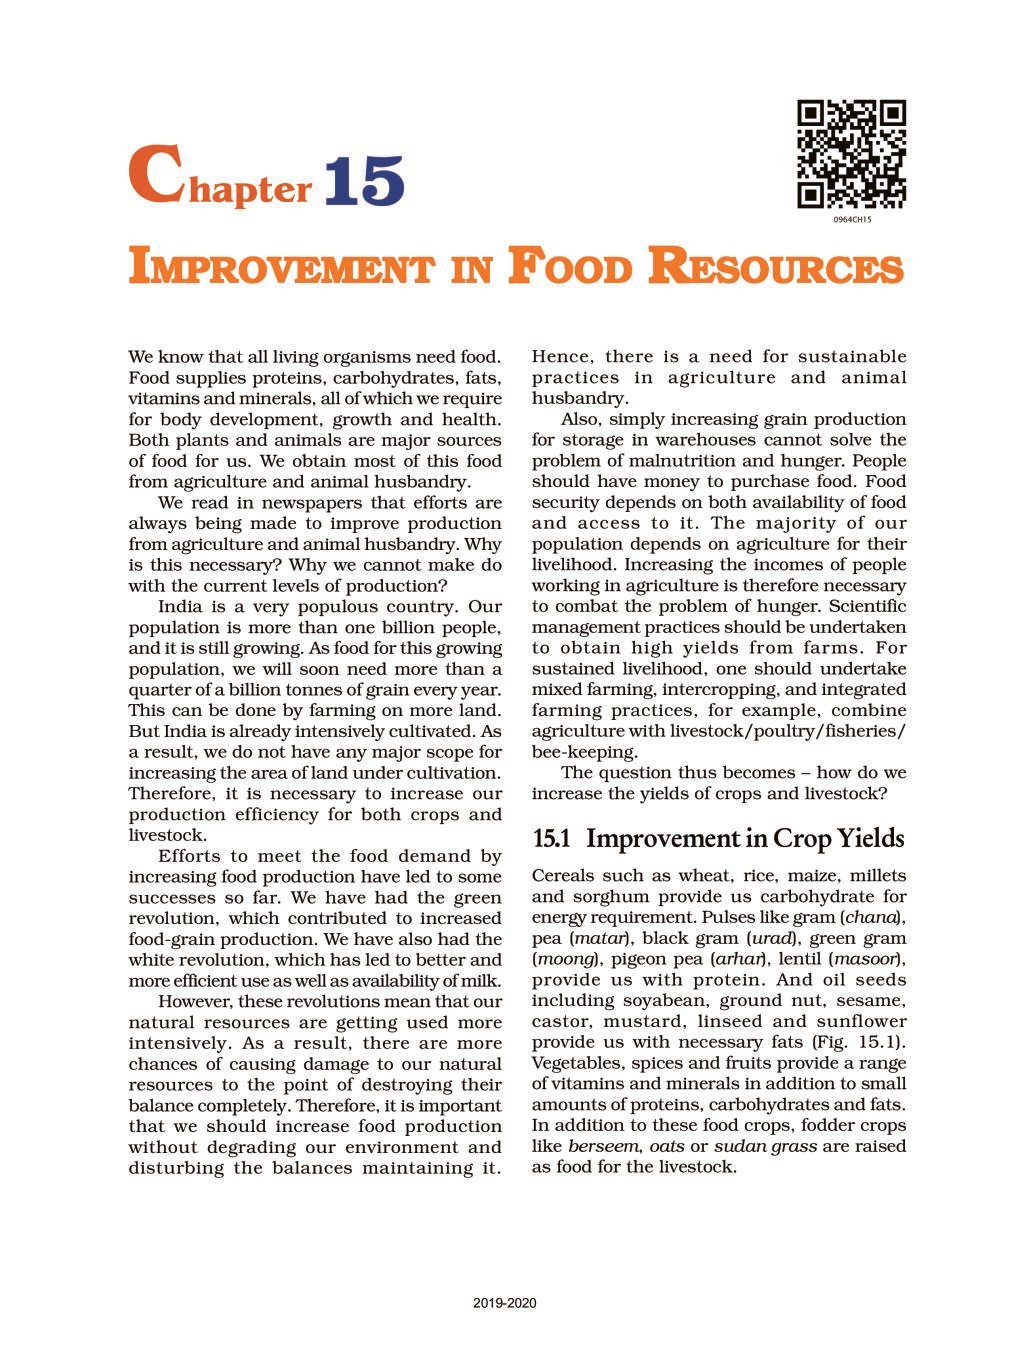 NCERT Book Class 9 Science Chapter 15 Improvement in food resources - Page 1